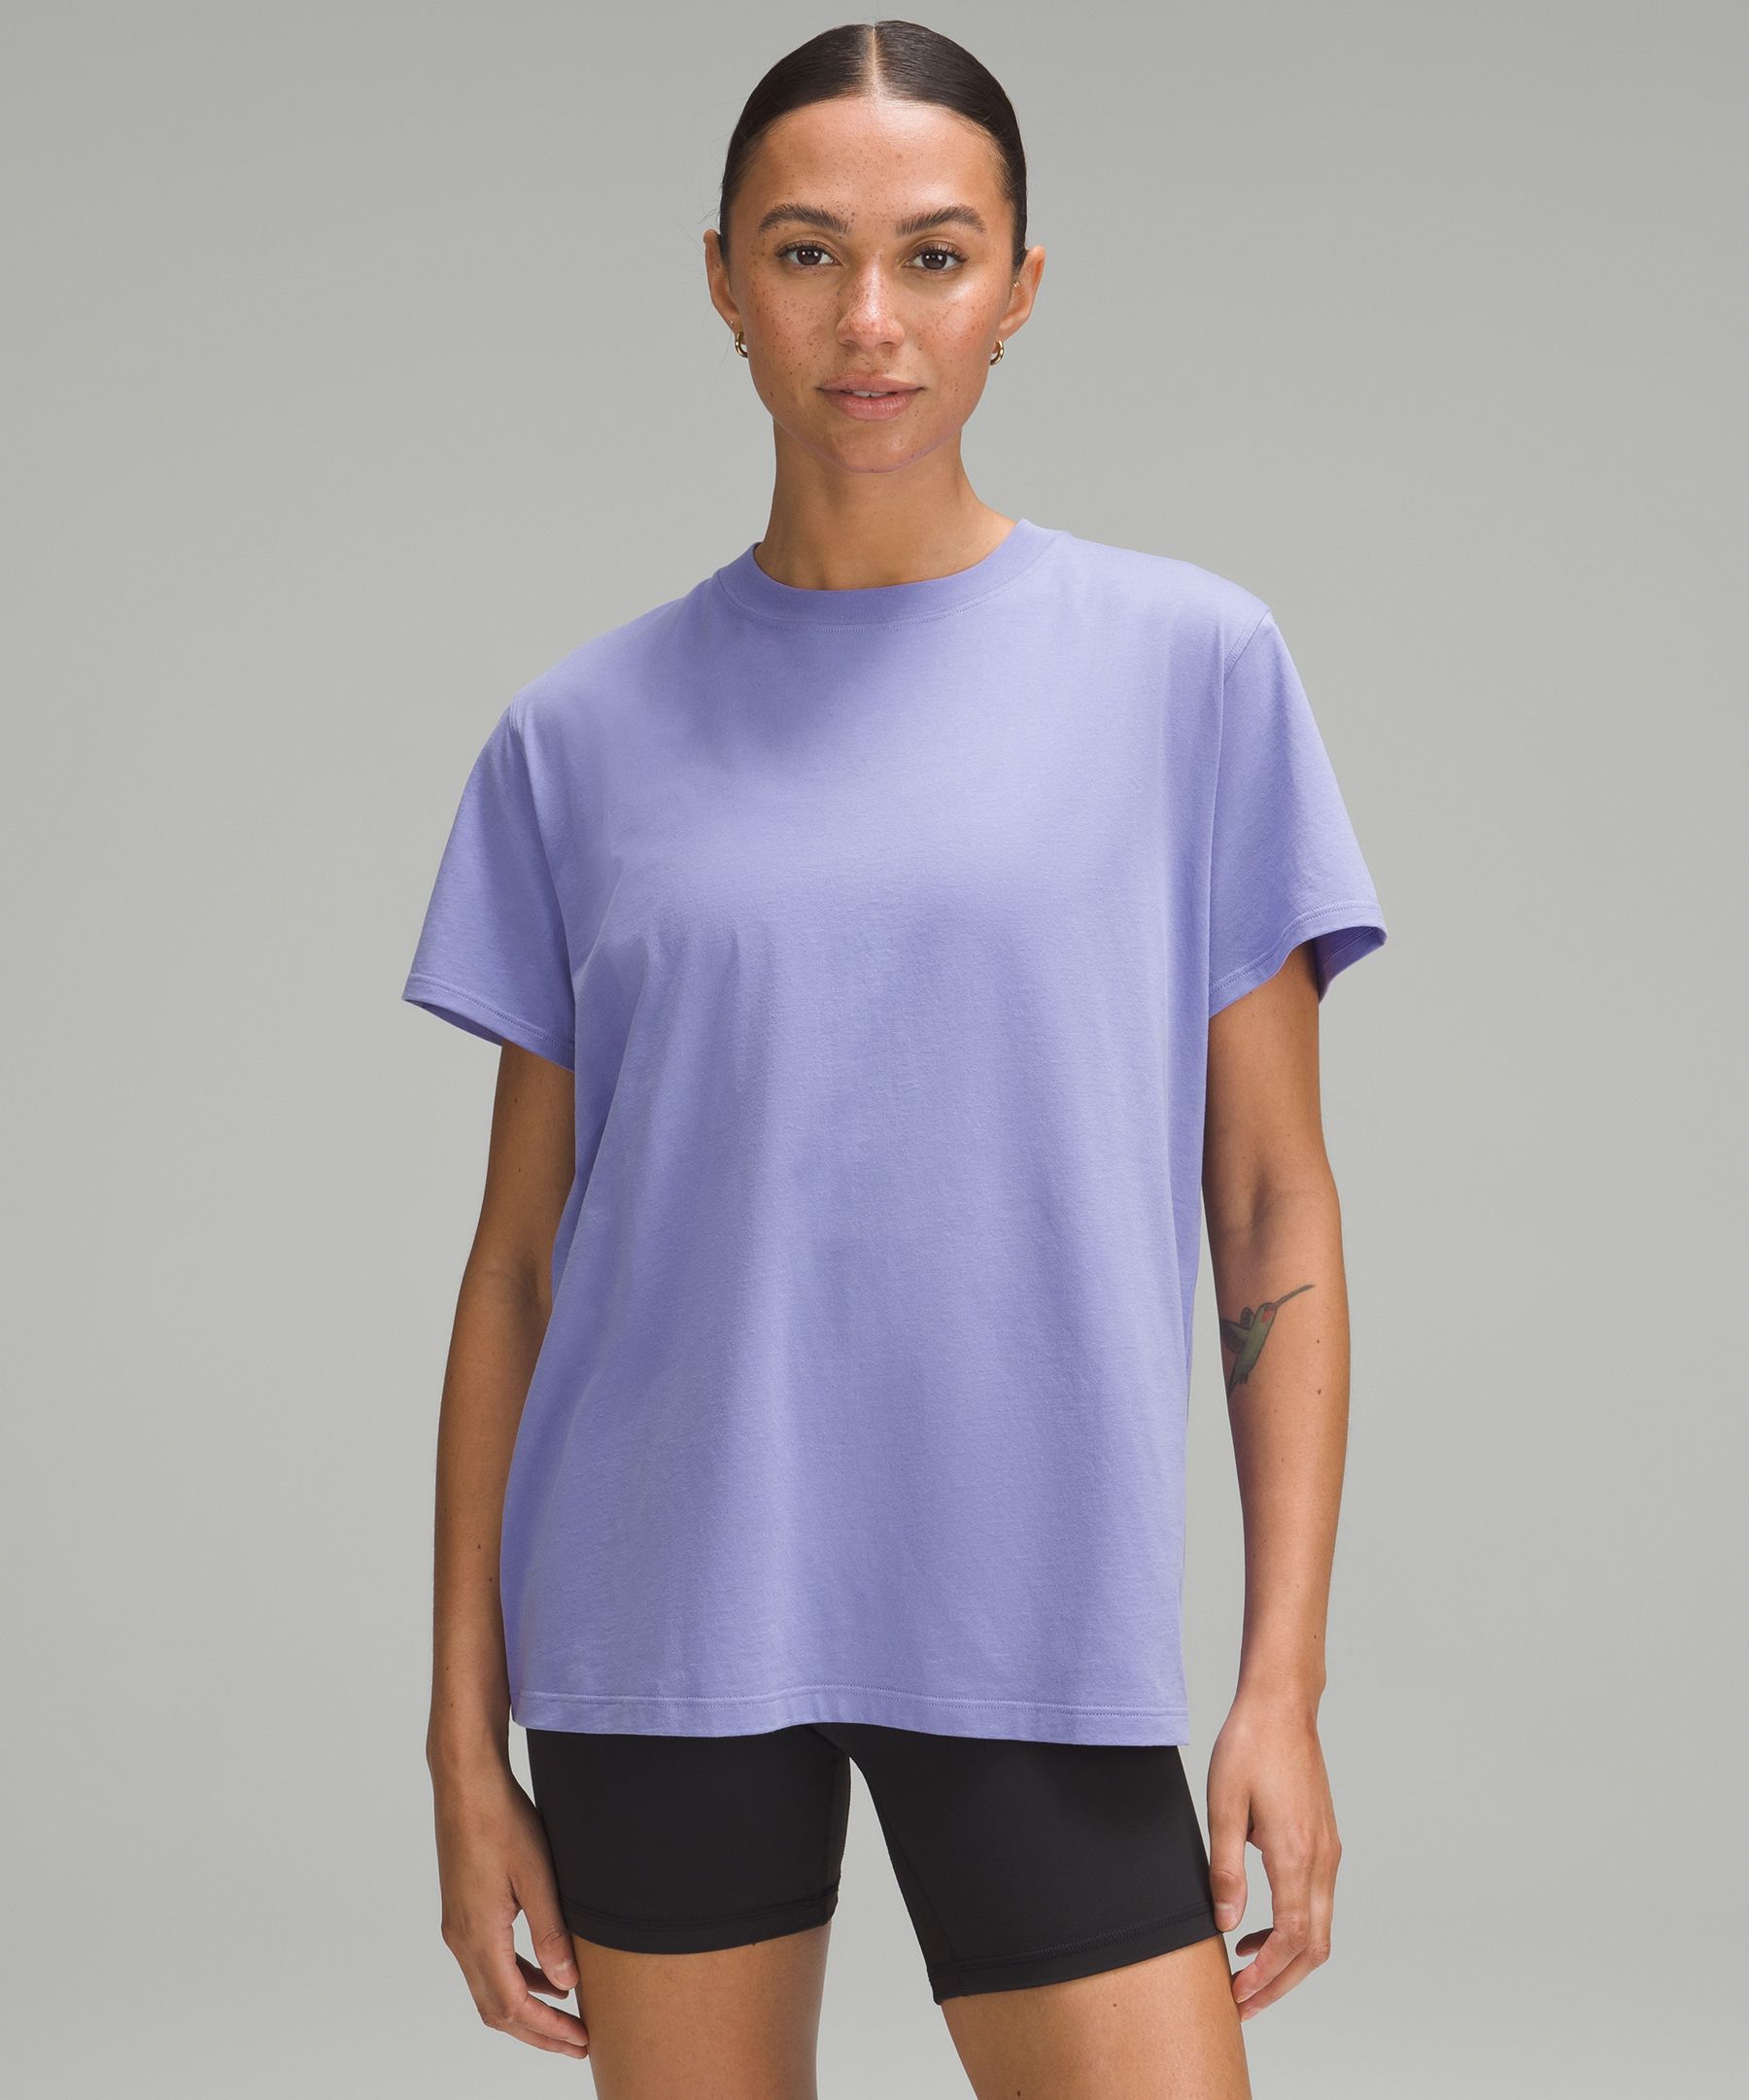 Lululemon All Yours Cotton T-Shirt. 1